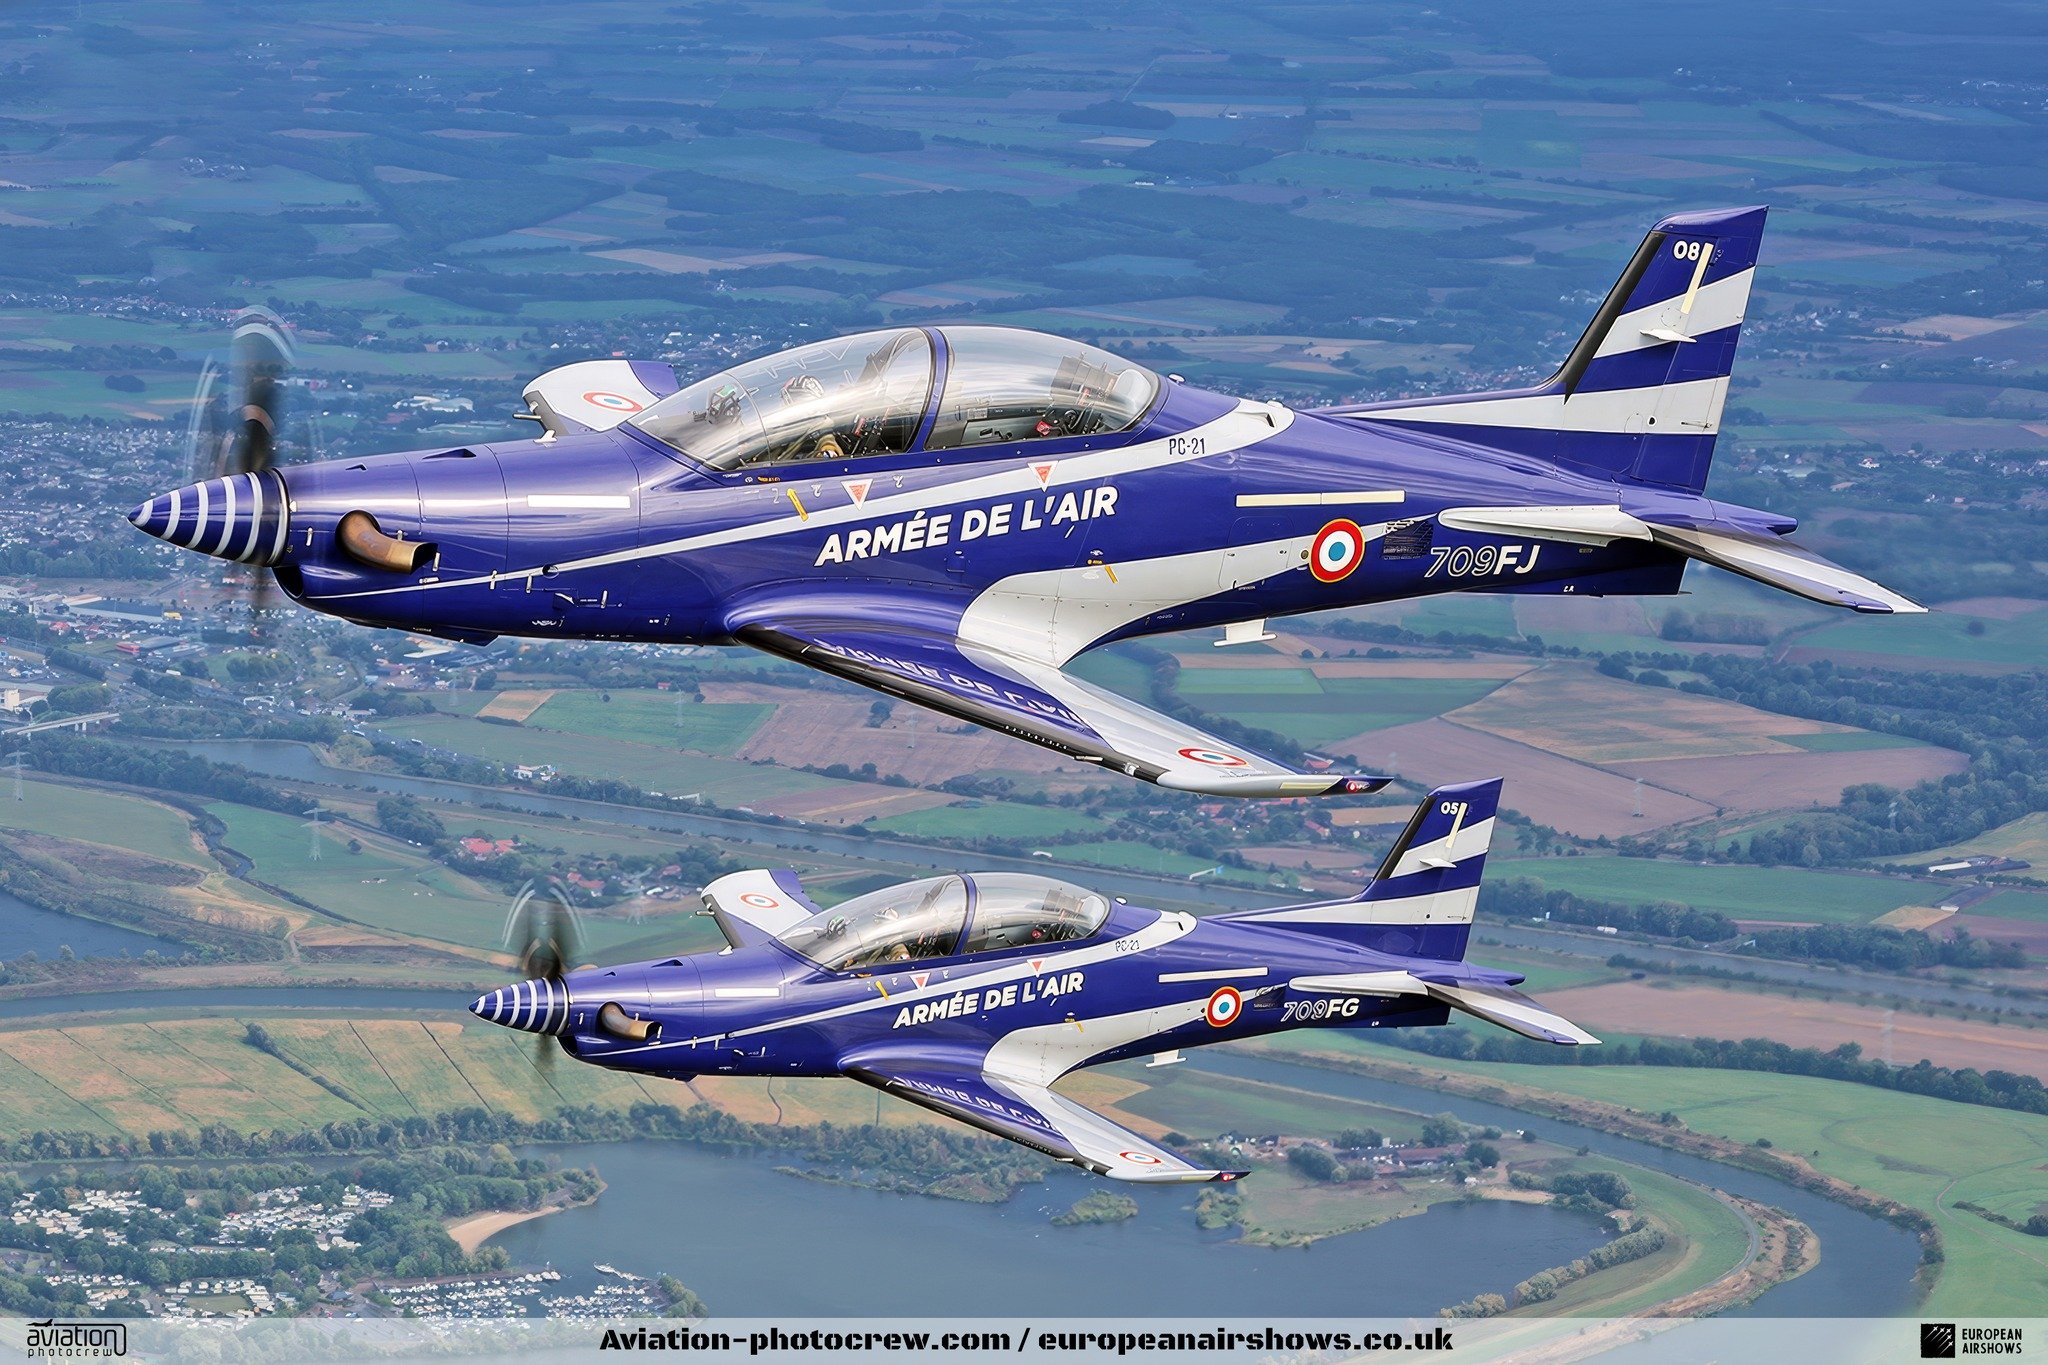 𝐀𝐈𝐑𝐒𝐇𝐎𝐖 𝐍𝐄𝐖𝐒: The Mustang X-Ray tactical demonstration team of the French Air and Space Force will be debuting at this year's @natodays on 21-22 September 2024!

This will not only be the debut of the team in Ostrava but also of PC-21. The